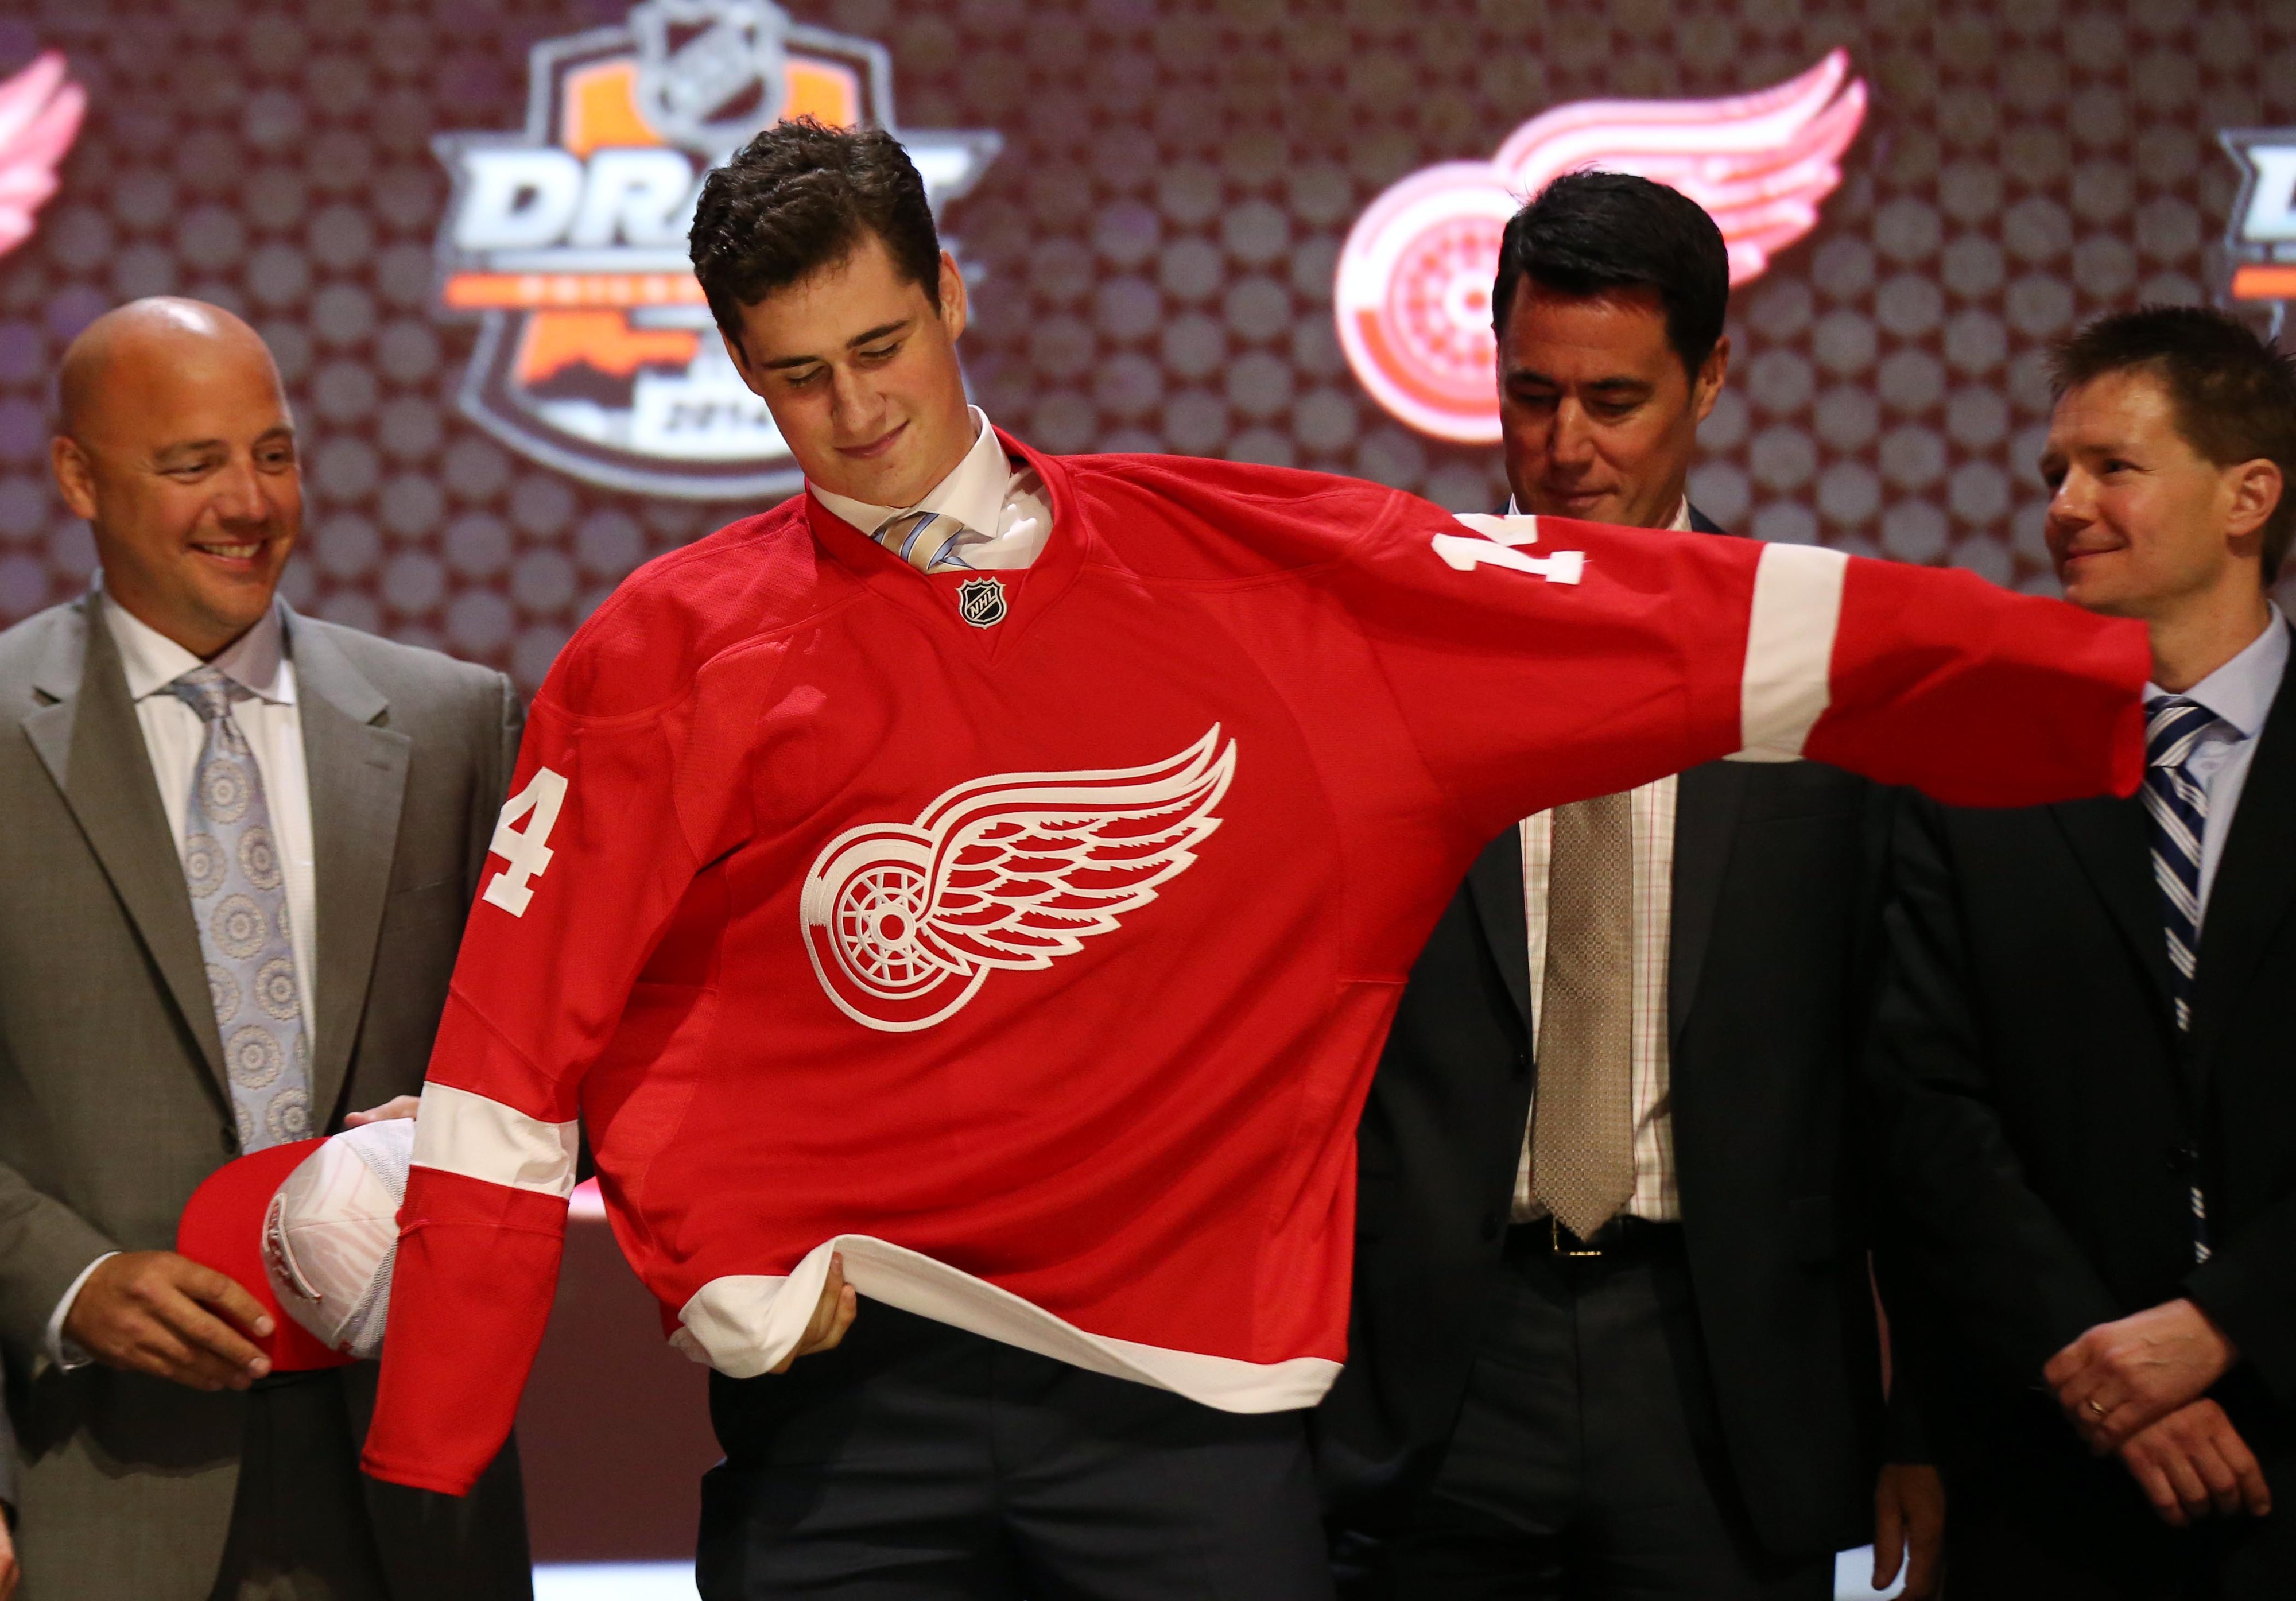 Oh great, they drafted a guy with a weird-shaped torso